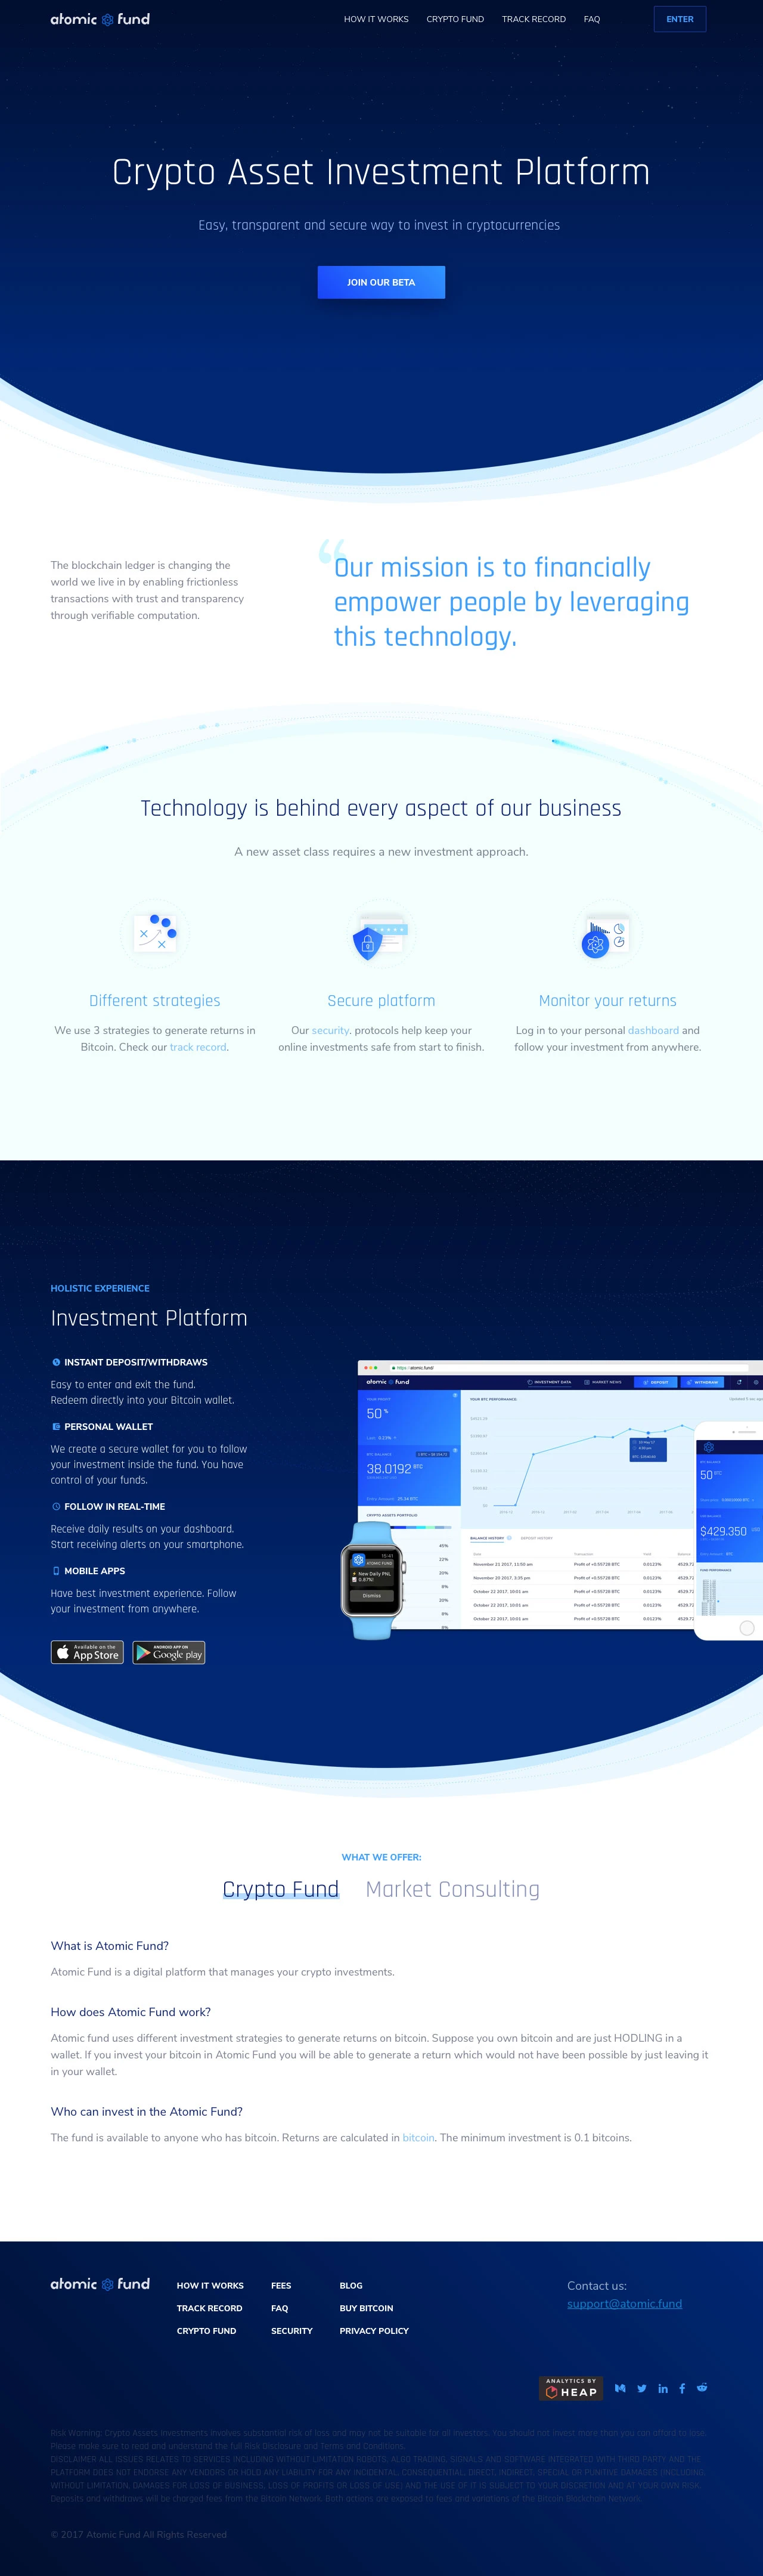 Atomic Fund Landing Page Example: Easy, transparent and secure way to invest in cryptocurrencies